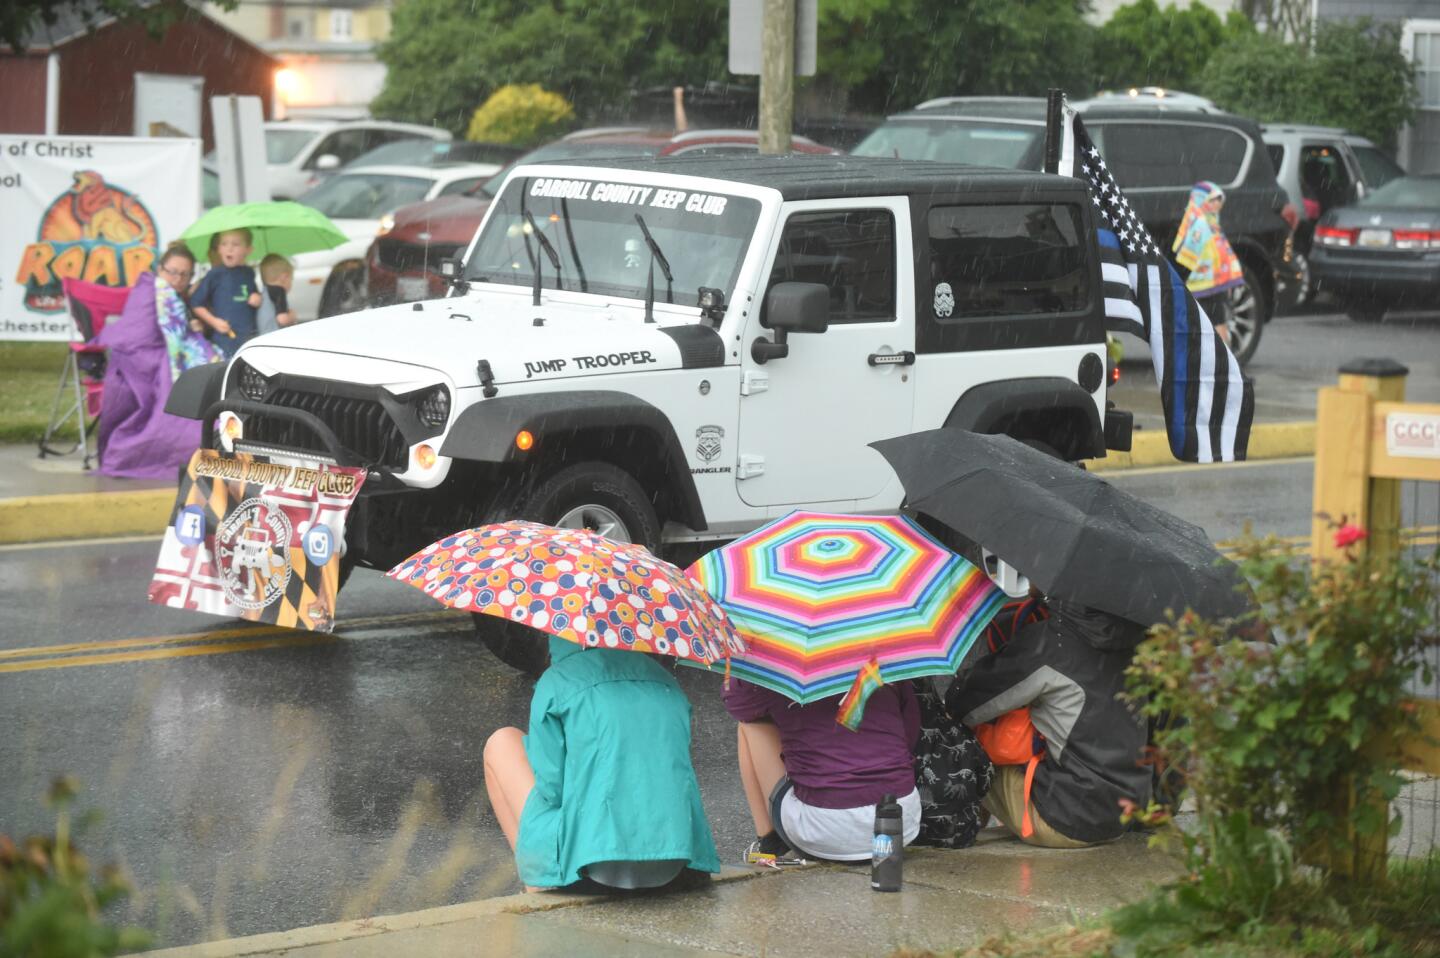 Spectators try to stay dry as they watch the parade from the safety of umbrellas during the Manchester Volunteer Fire Company carnvial on Tuesday, July 2.